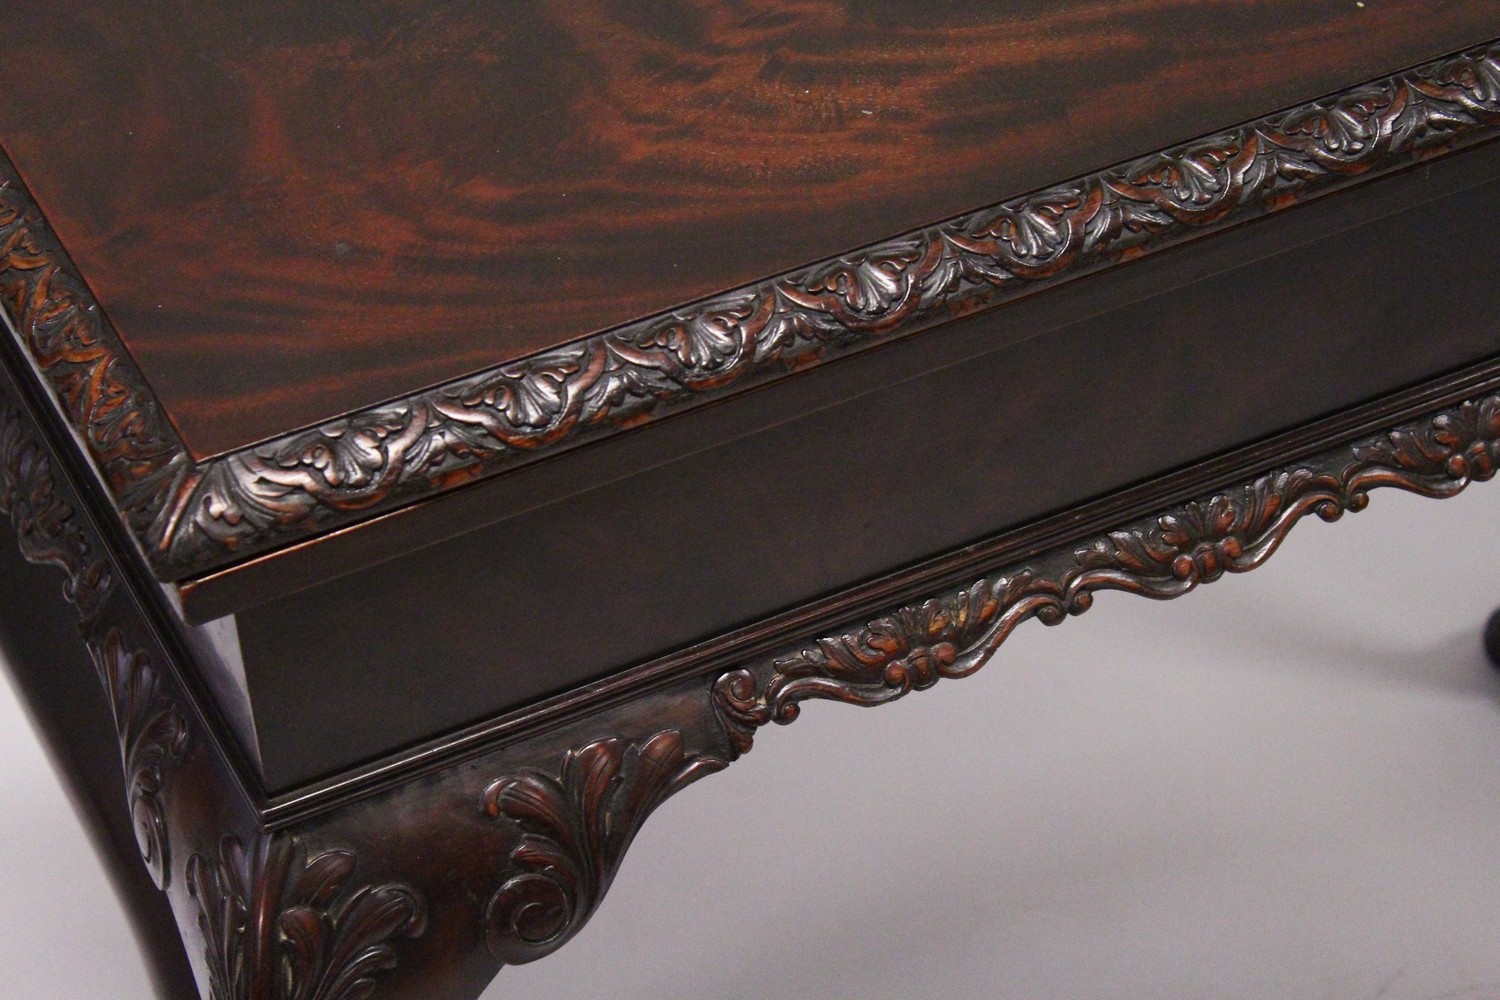 A GOOD GEORGE III DESIGN "IRISH" MAHOGANY FOLD-OVER CARD TABLE, EARLY 20TH CENTURY, with green baize - Image 2 of 10